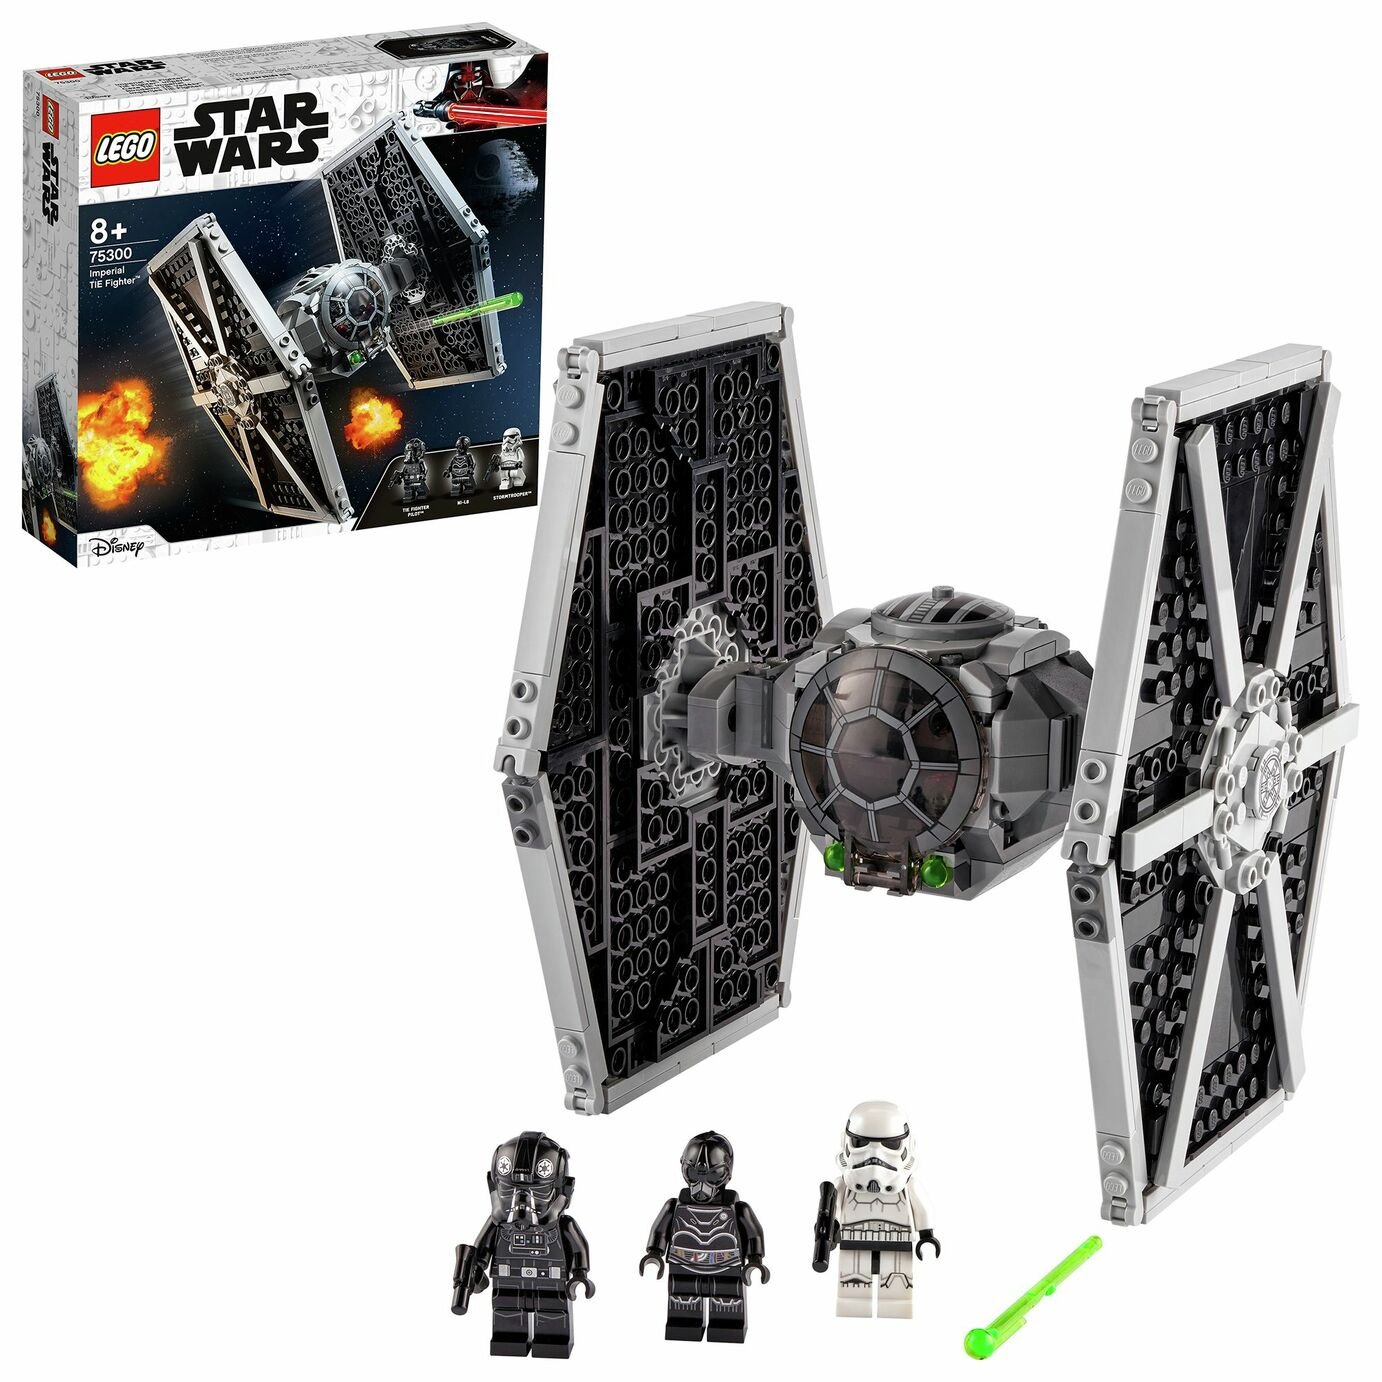 LEGO Star Wars Imperial TIE Fighter Toy 75300